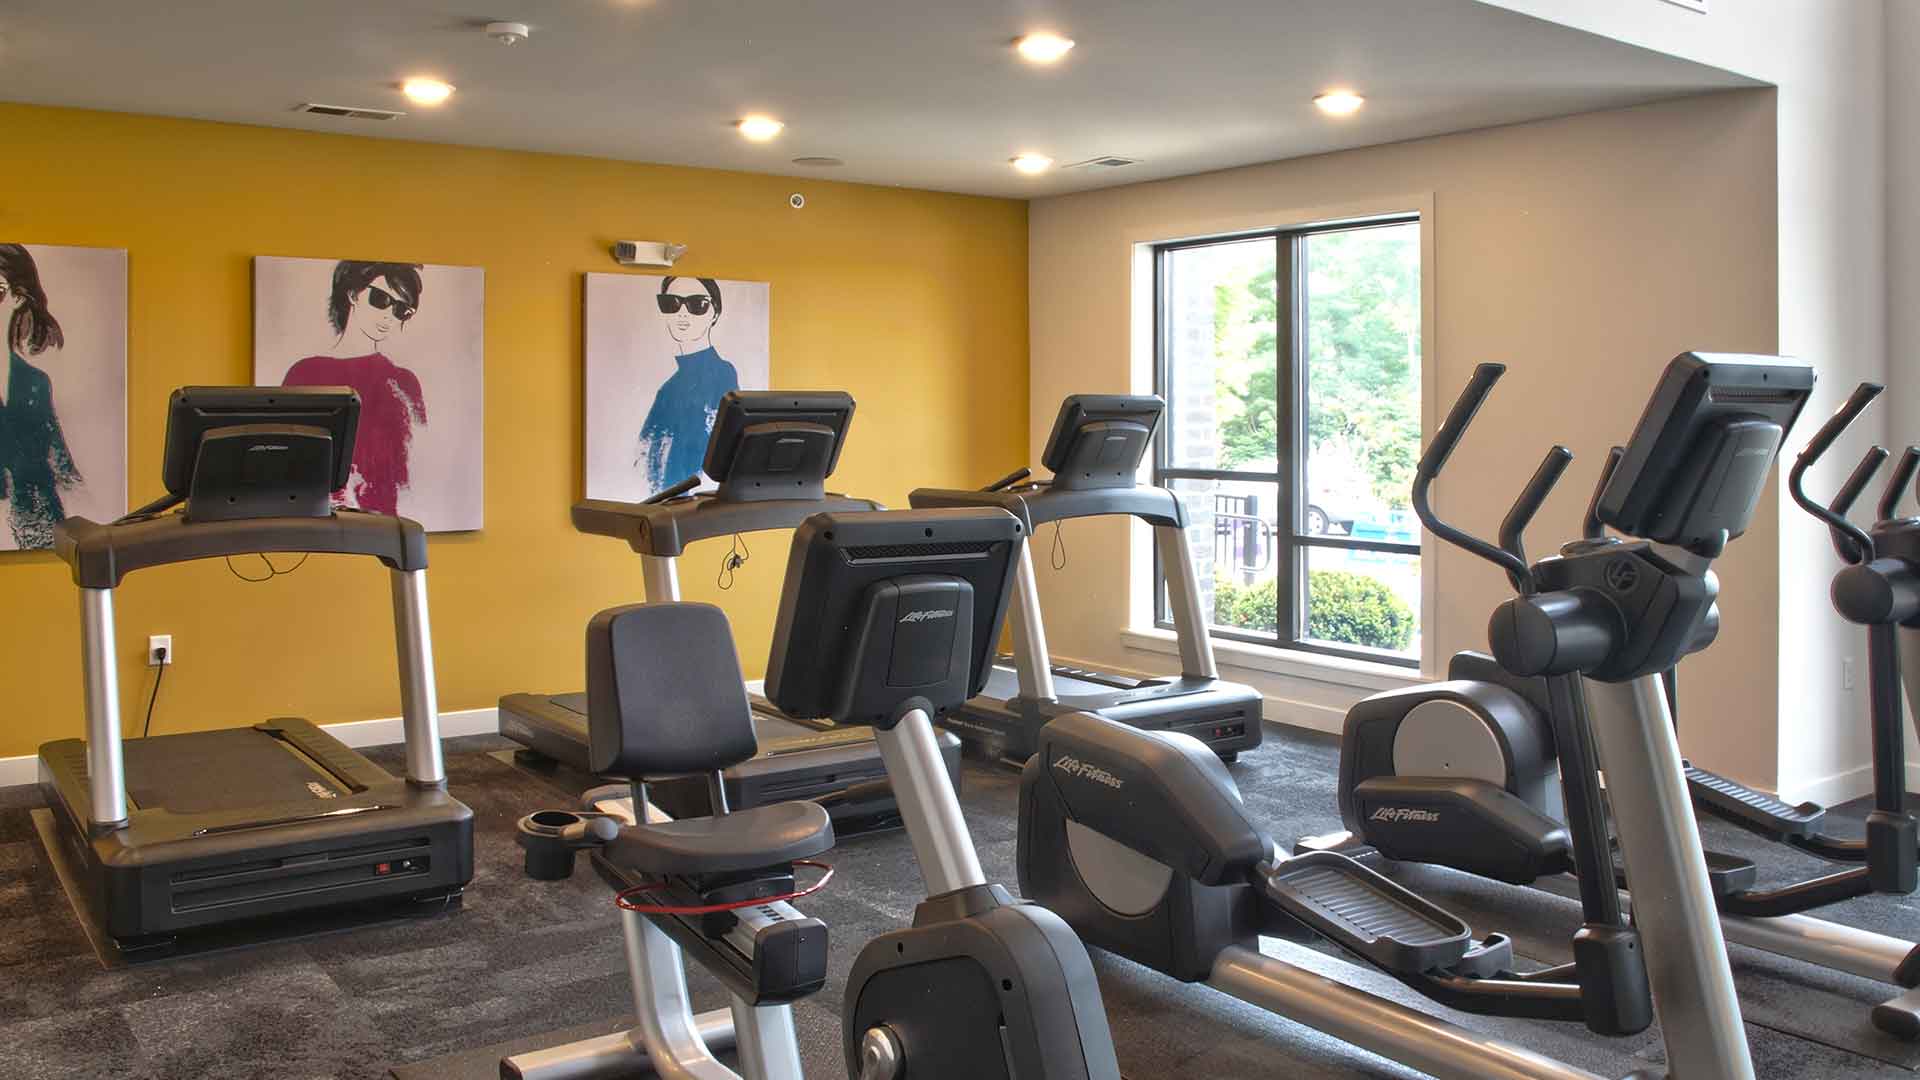 Fitness center with exercise machines at Allure.